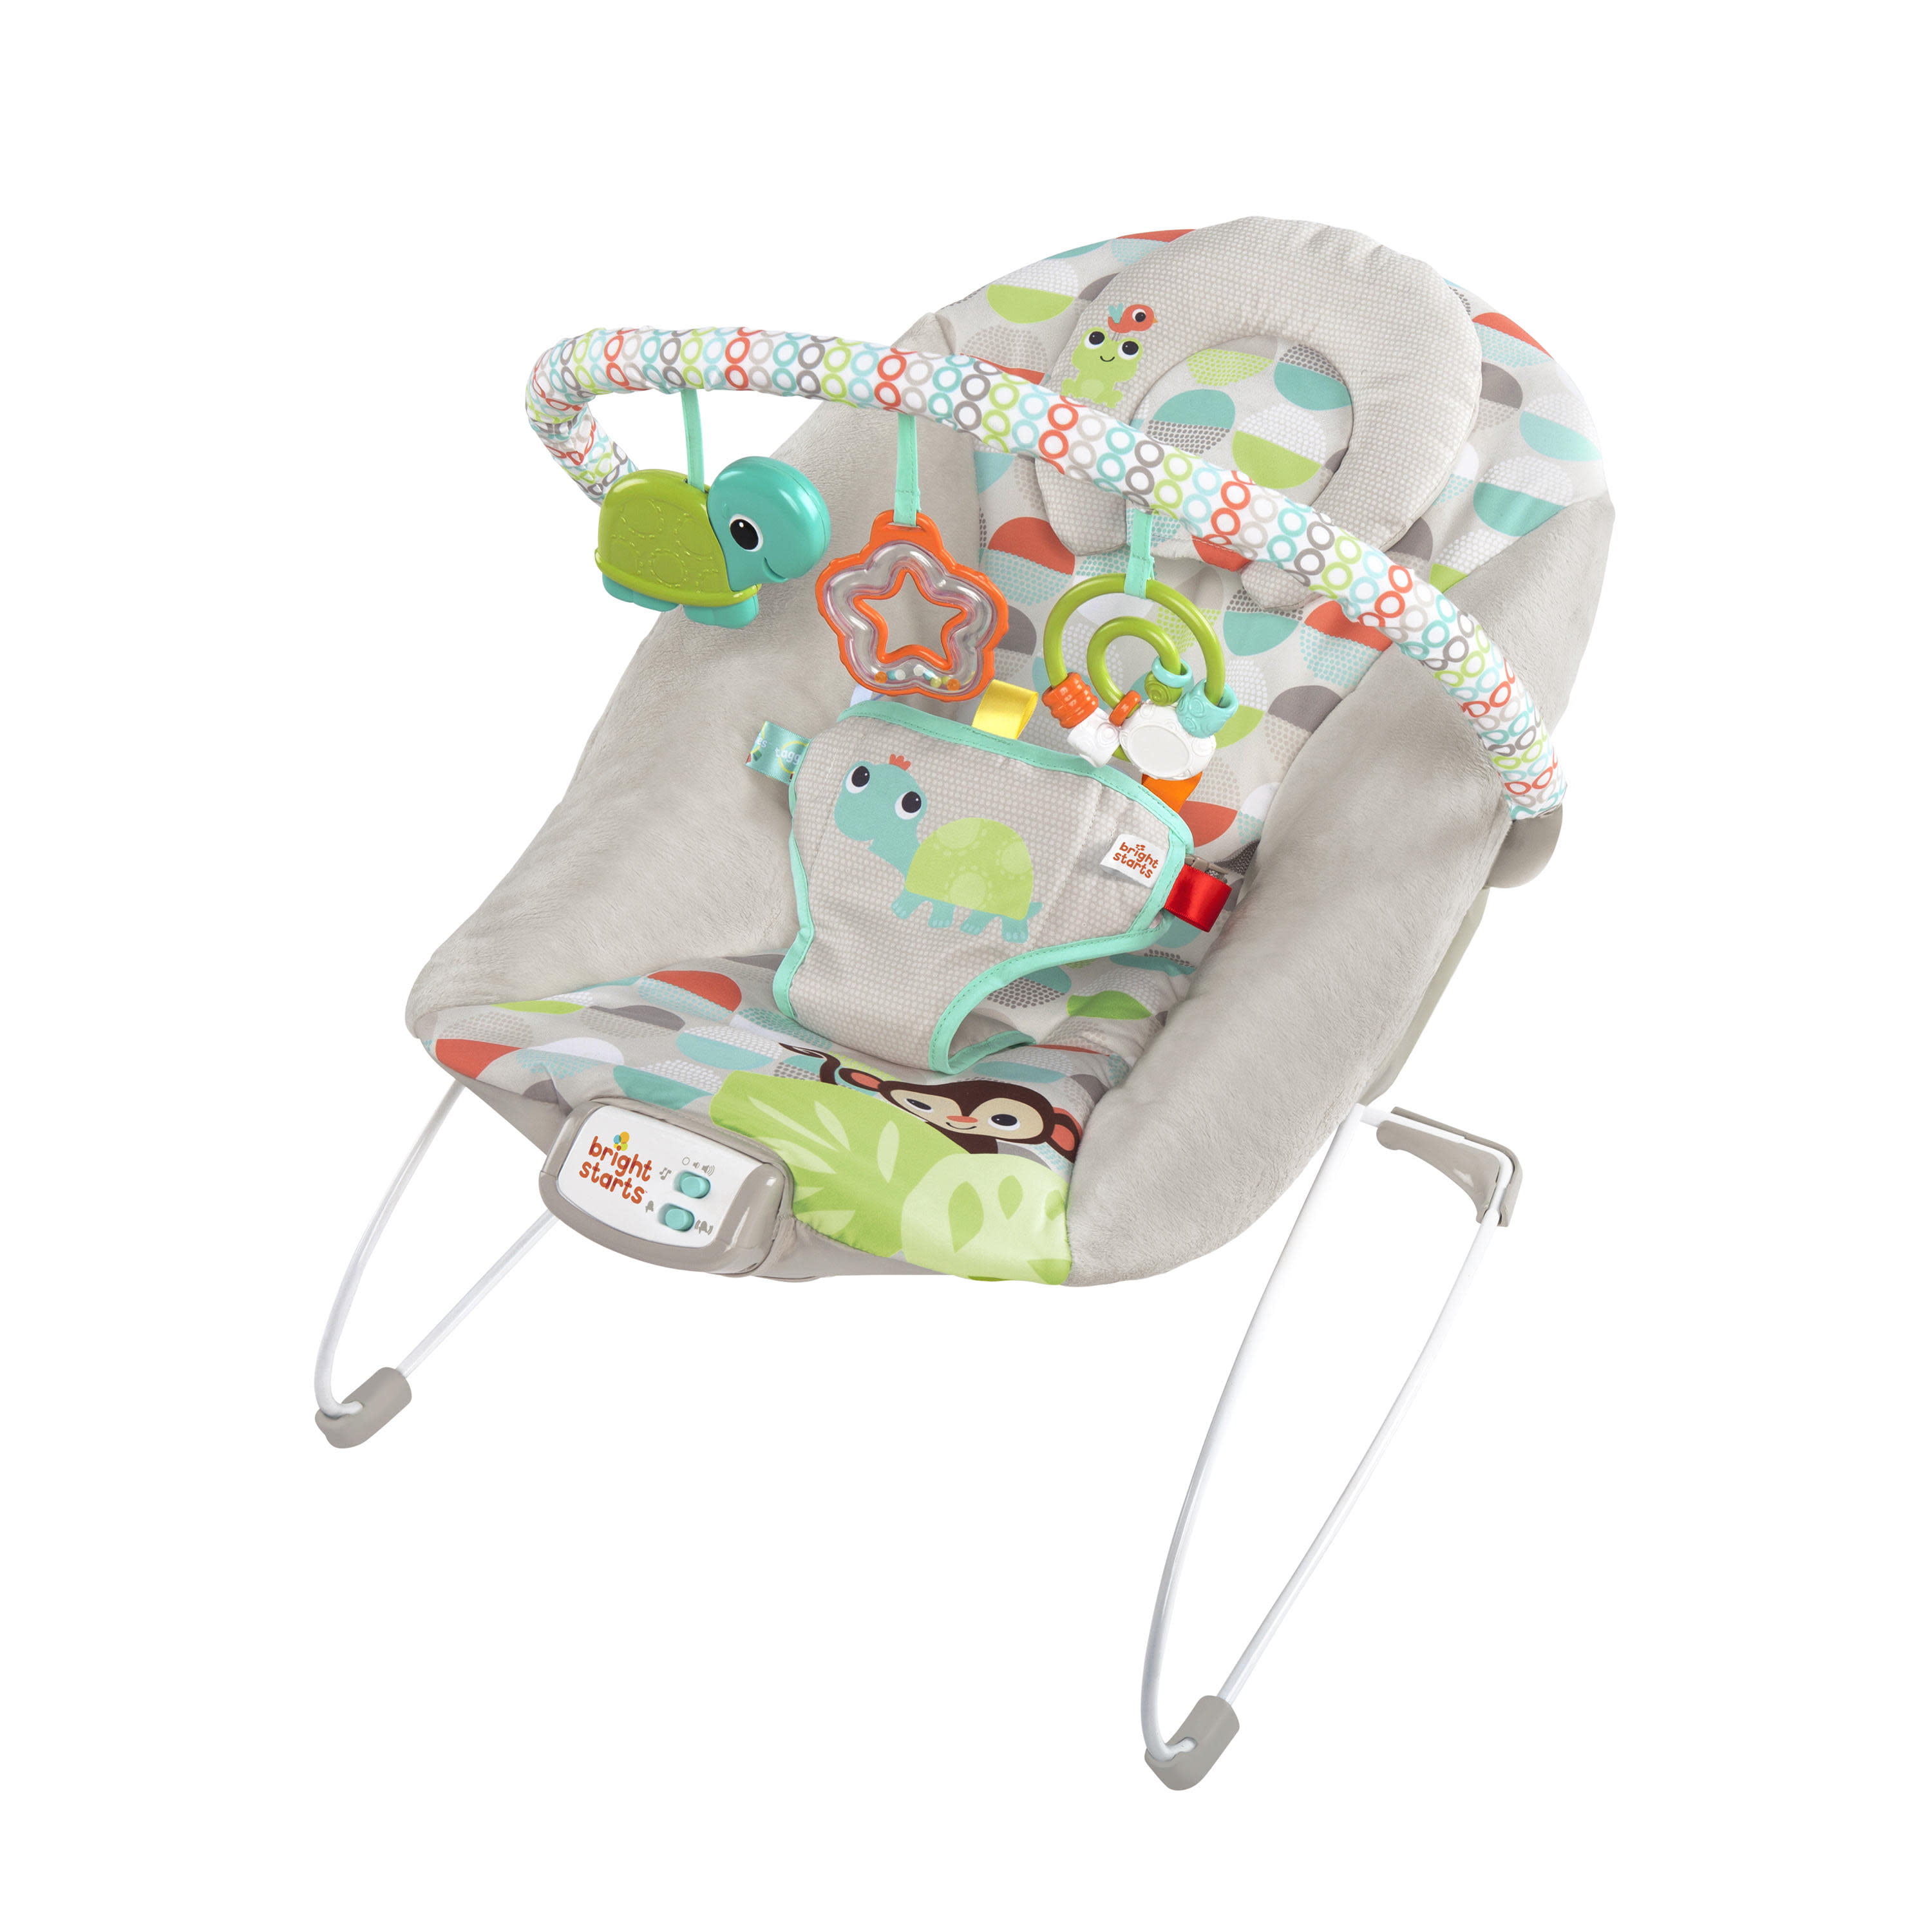 graco move with me soother bouncer